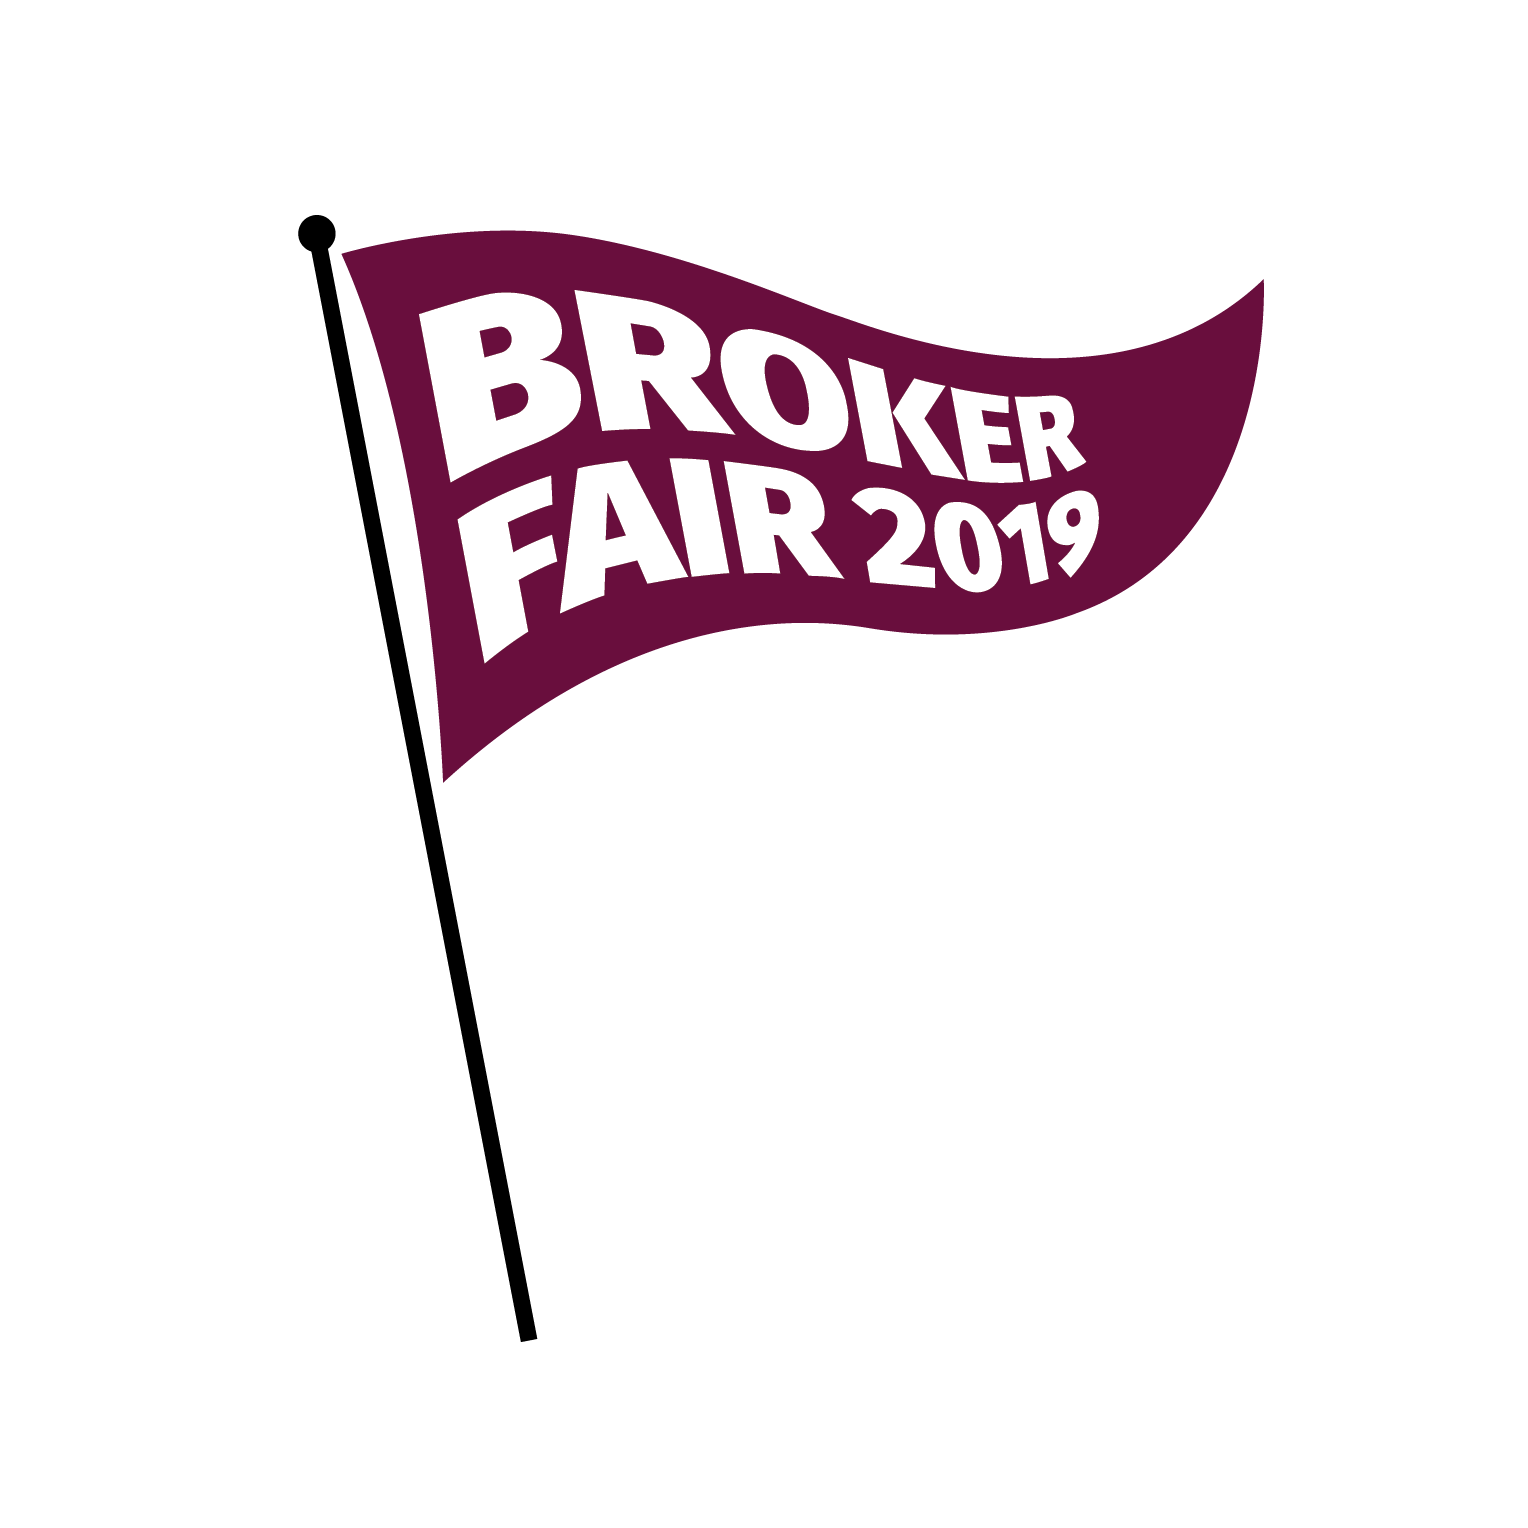 Broker Fair 2019 The annual conference for MCA and business loan brokers